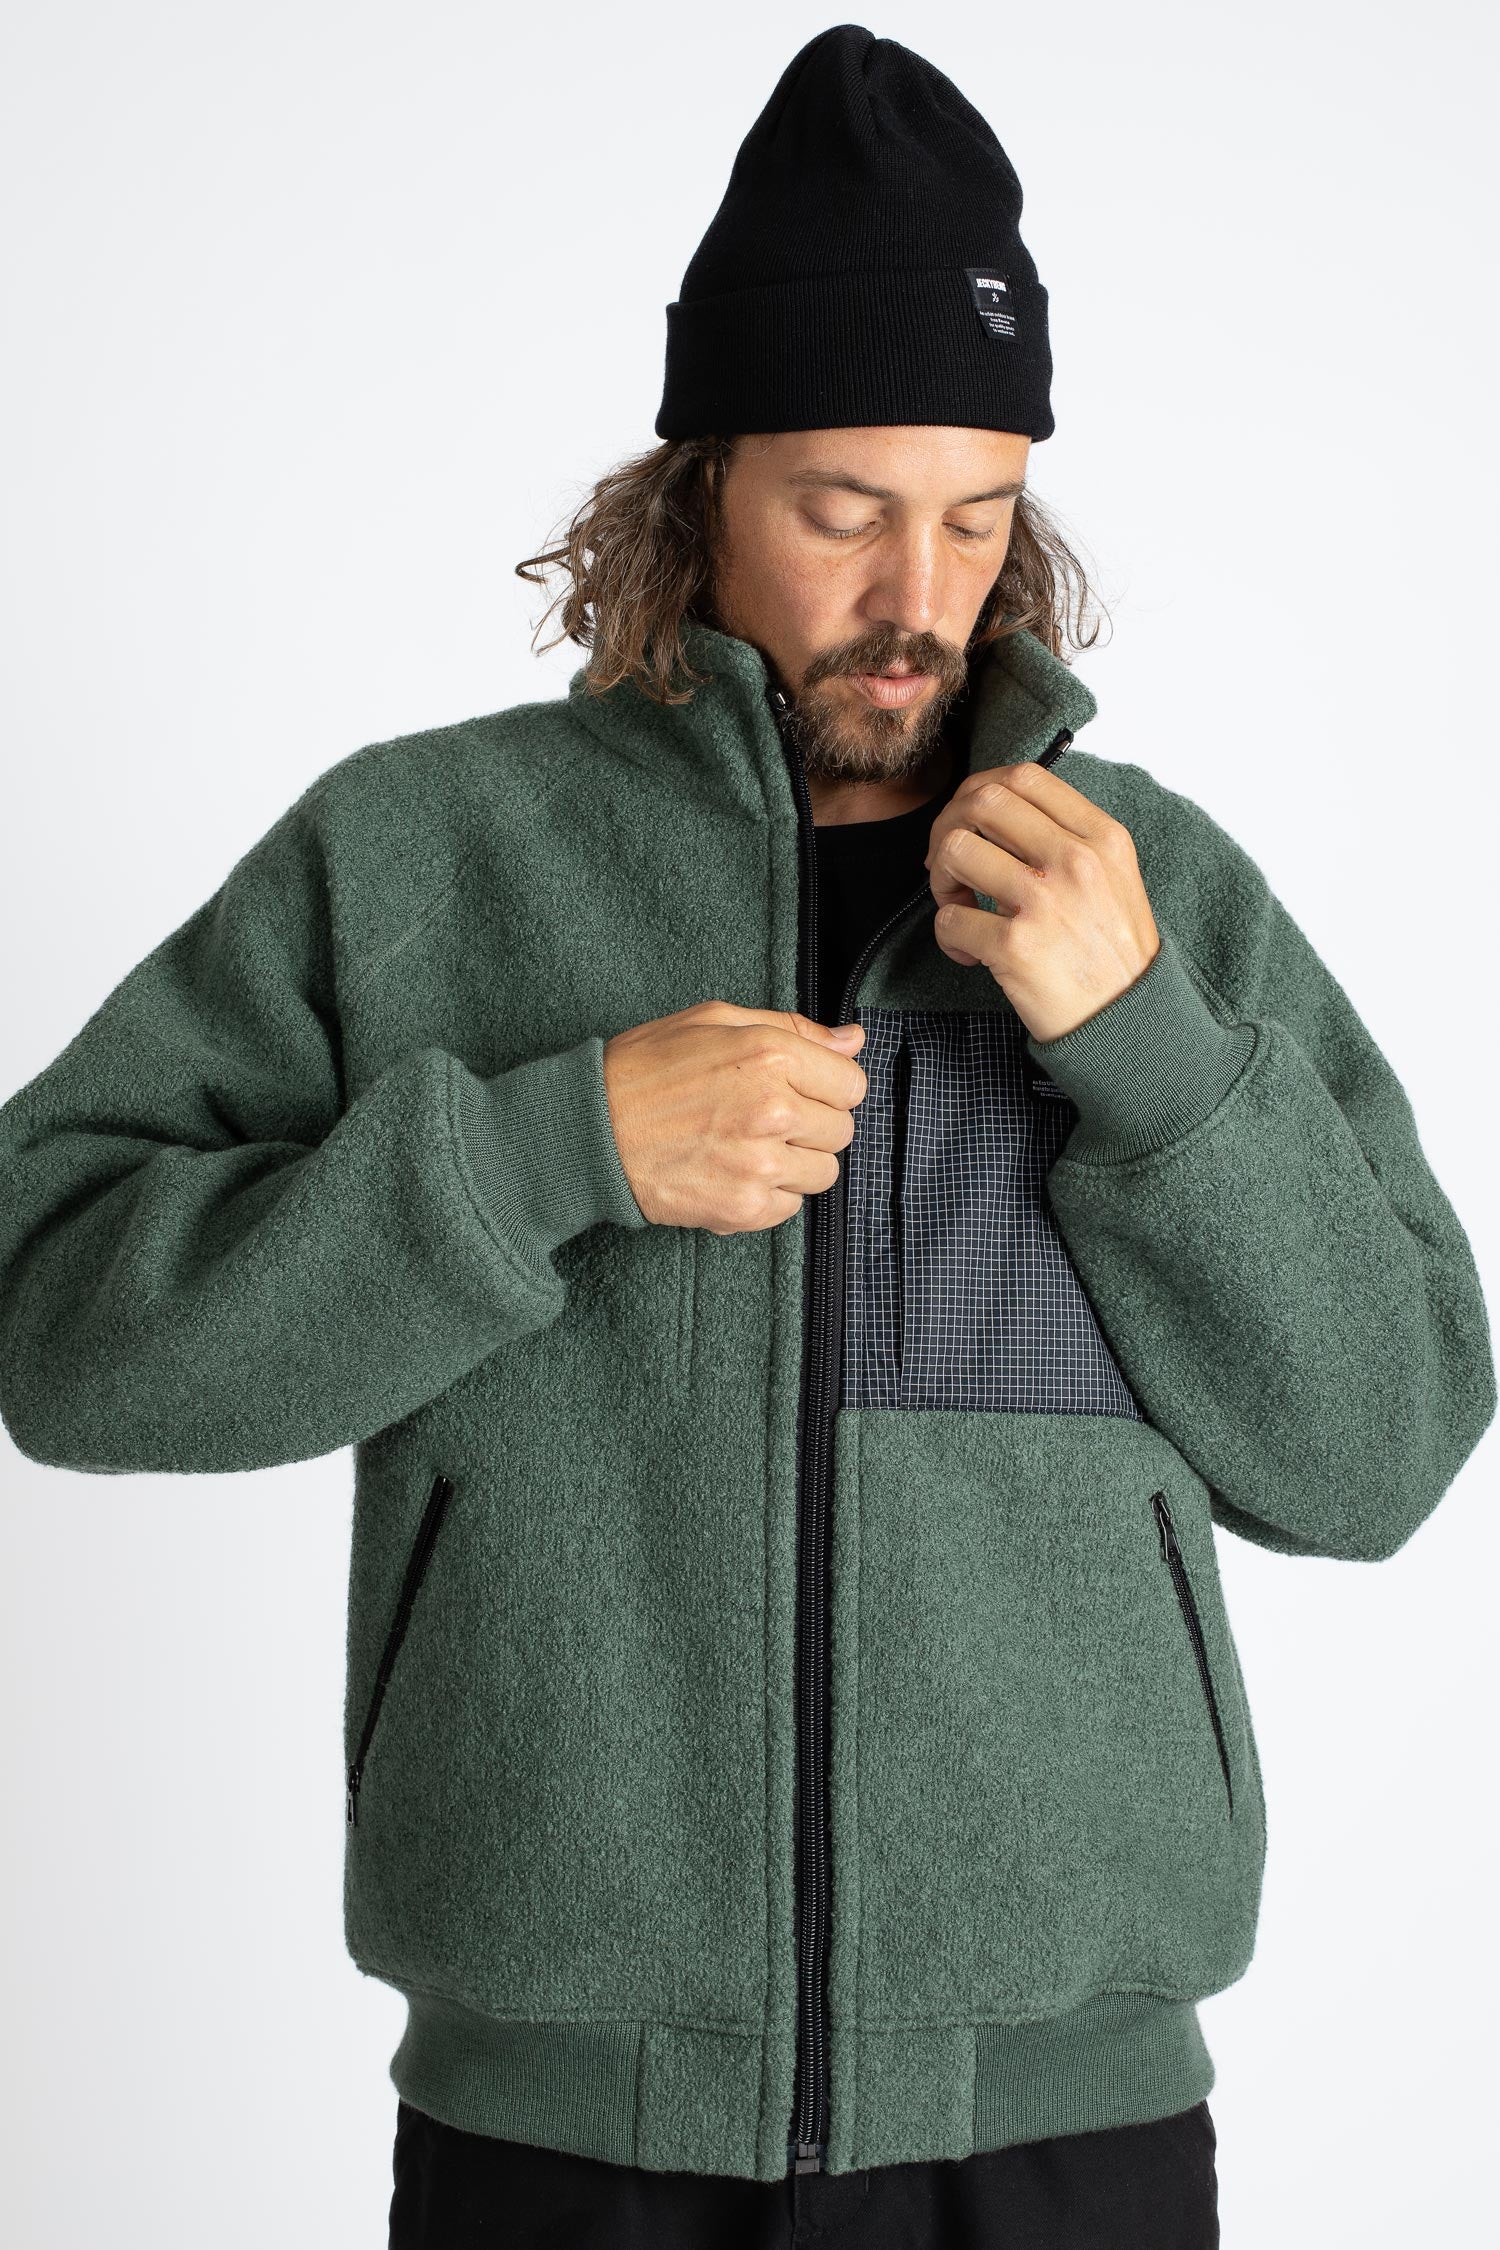 JECKYBENG-The-NATURAL-WOOLFLEECE-JACKET-13 olive-green